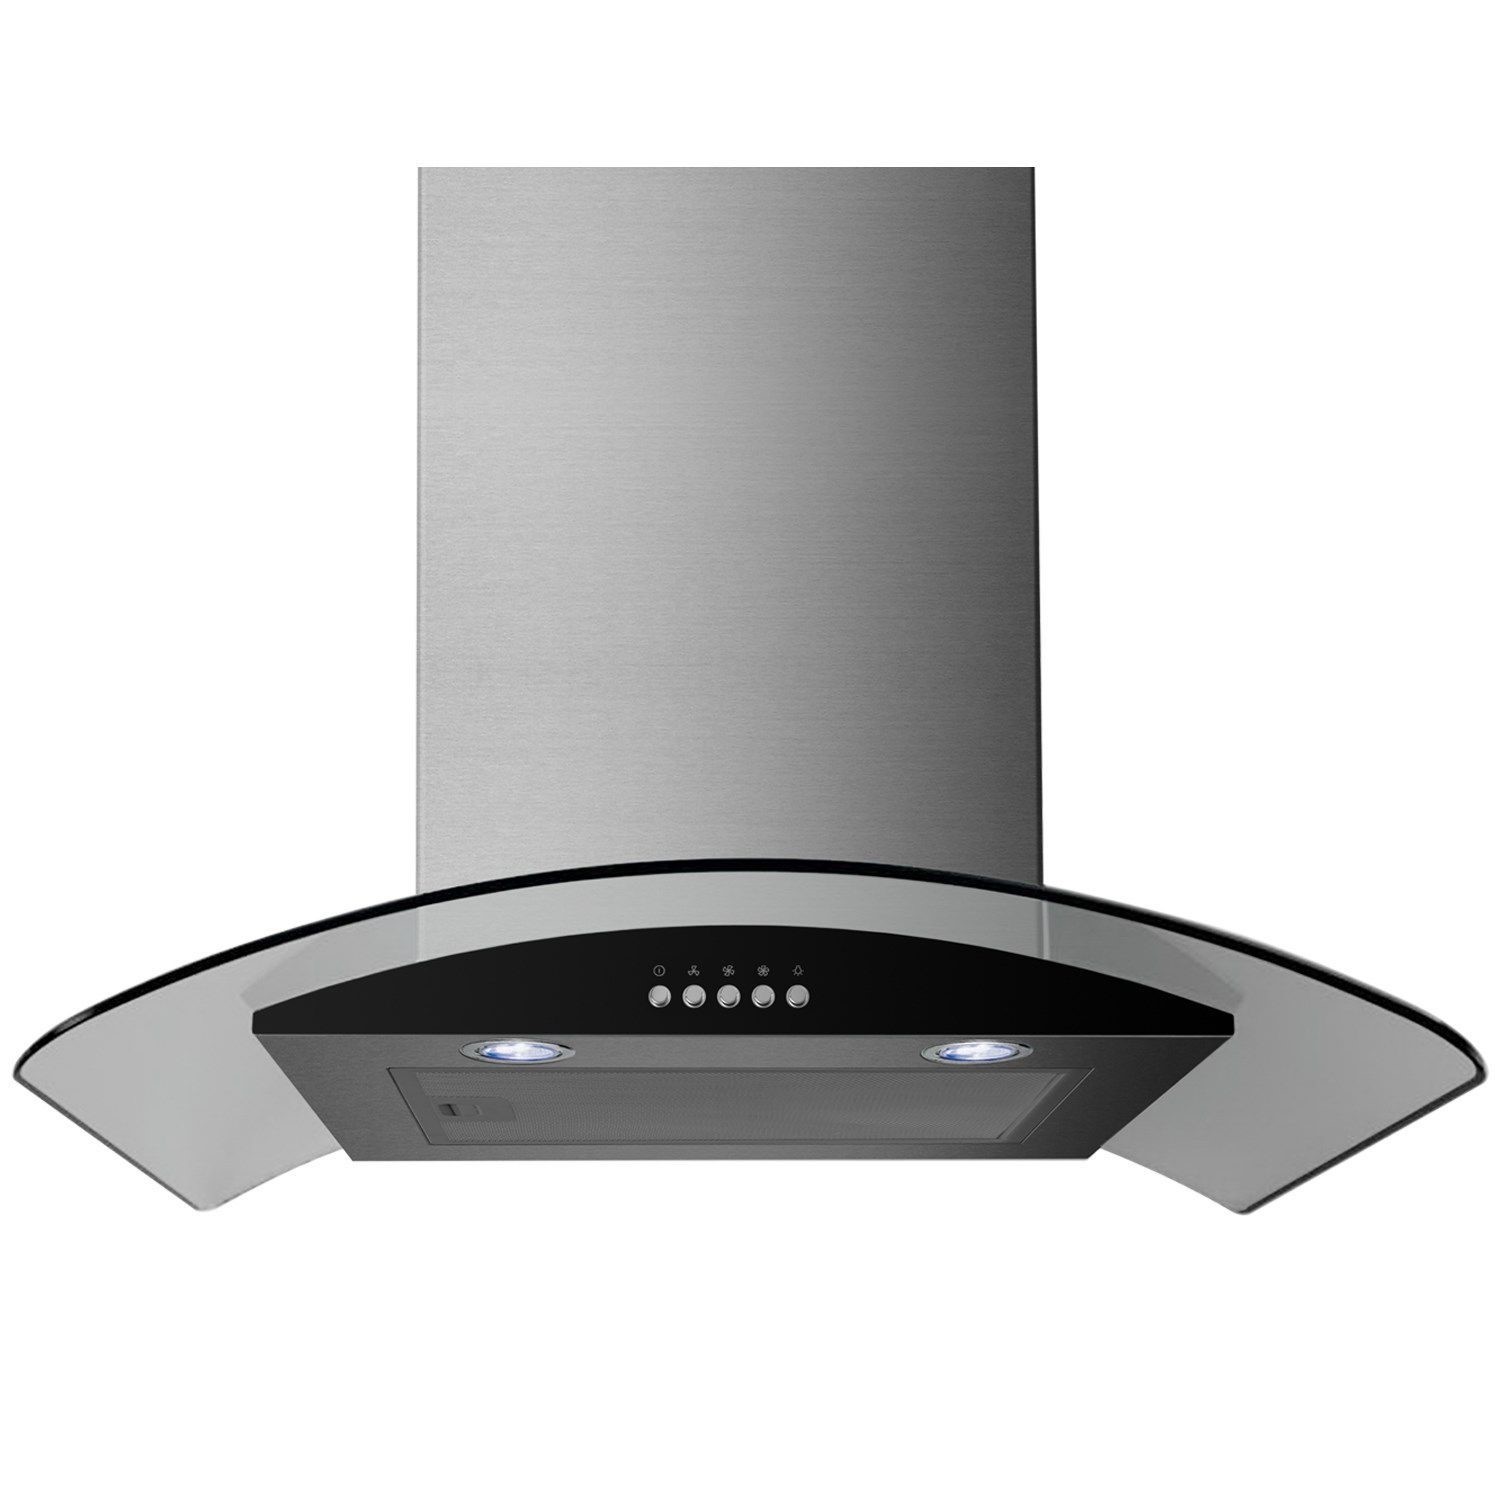 60cm Stainless Steel Curved Glass Chimney Cooker Hood